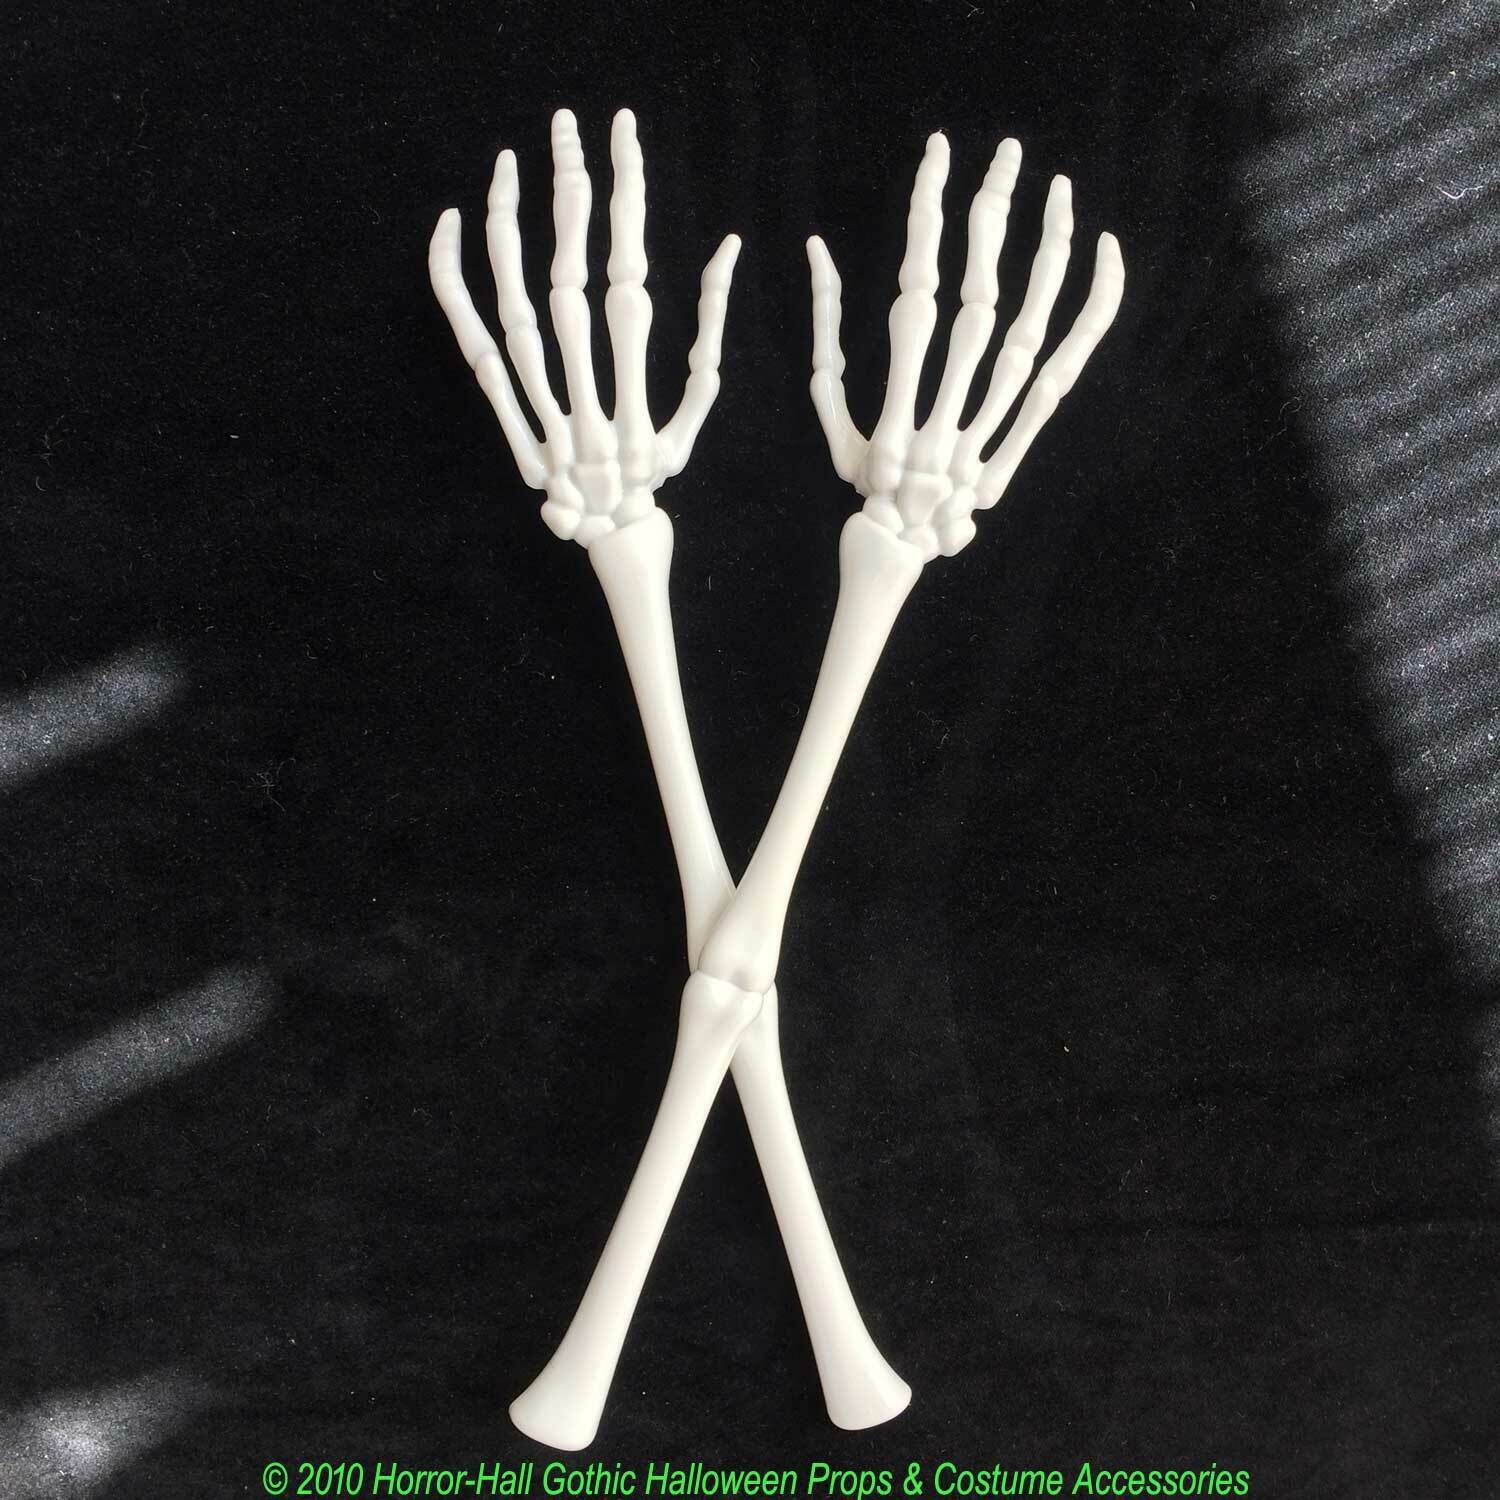 Gothic SKELETON TONGS SALAD SERVERS Hands Arms Halloween Prop Kitchen Decoration